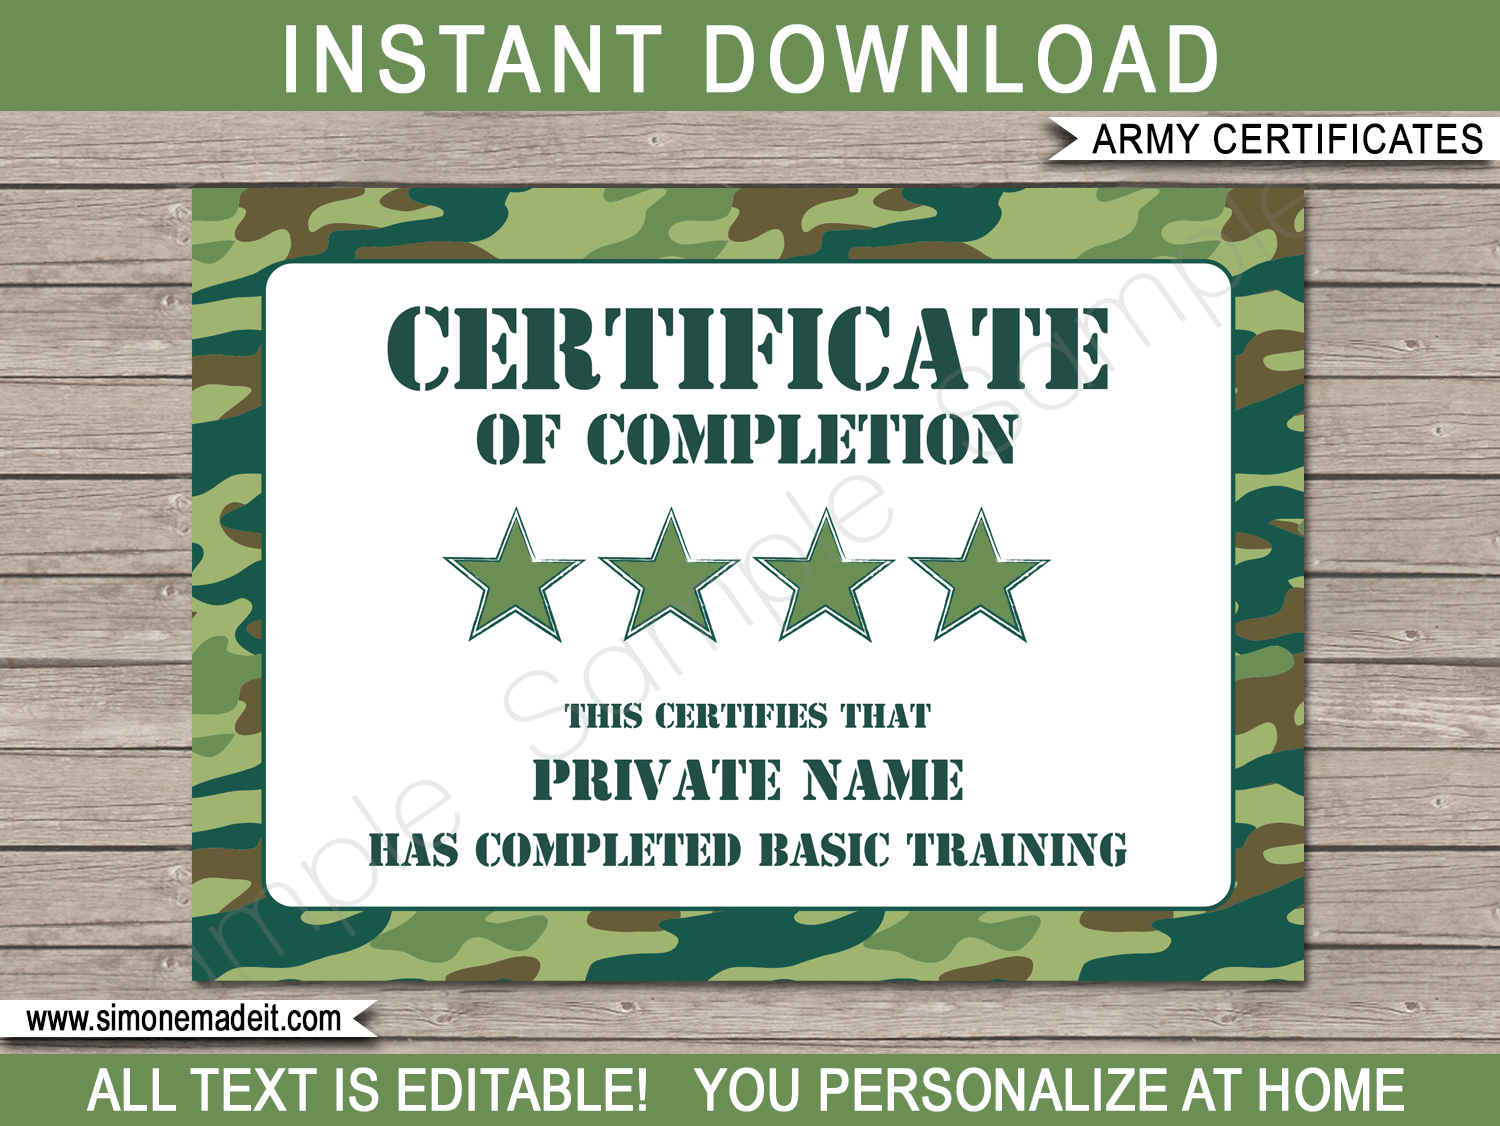 Army Certificate Template - Green Camo | Certificate of Completion of Boot Camp or Basic Training | DIY Editable & Printable Template | Army Theme Birthday Party | $3.00 INSTANT DOWNLOAD via simonemadeit.com